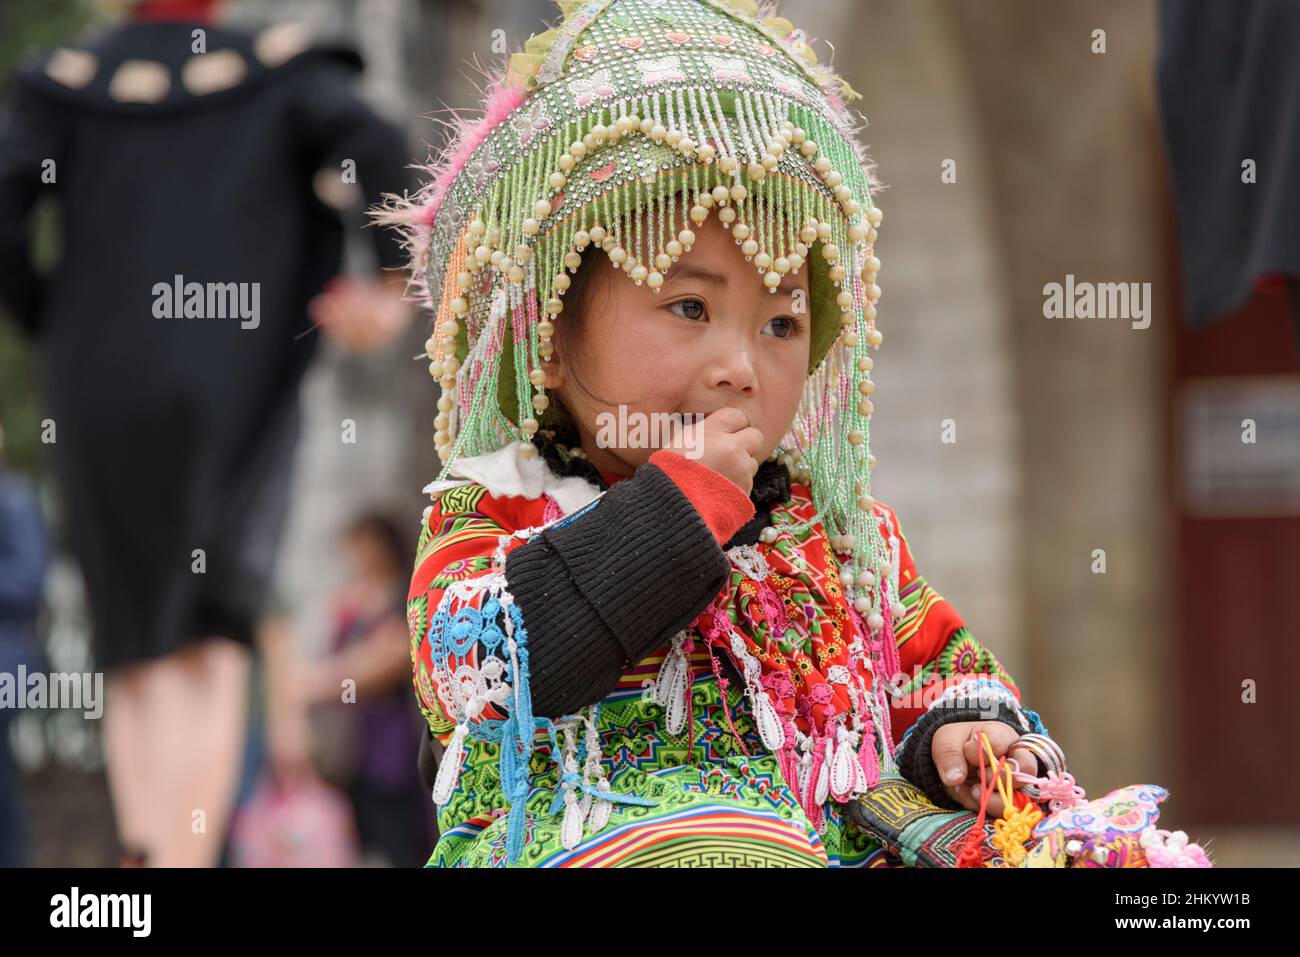 A young girl, wearing traditional Hmong tribe clothing, waits to pose for photographs by tourists in the town square, Sapa (Sa Pa), Lao Cai, Vietnam Stock Photo